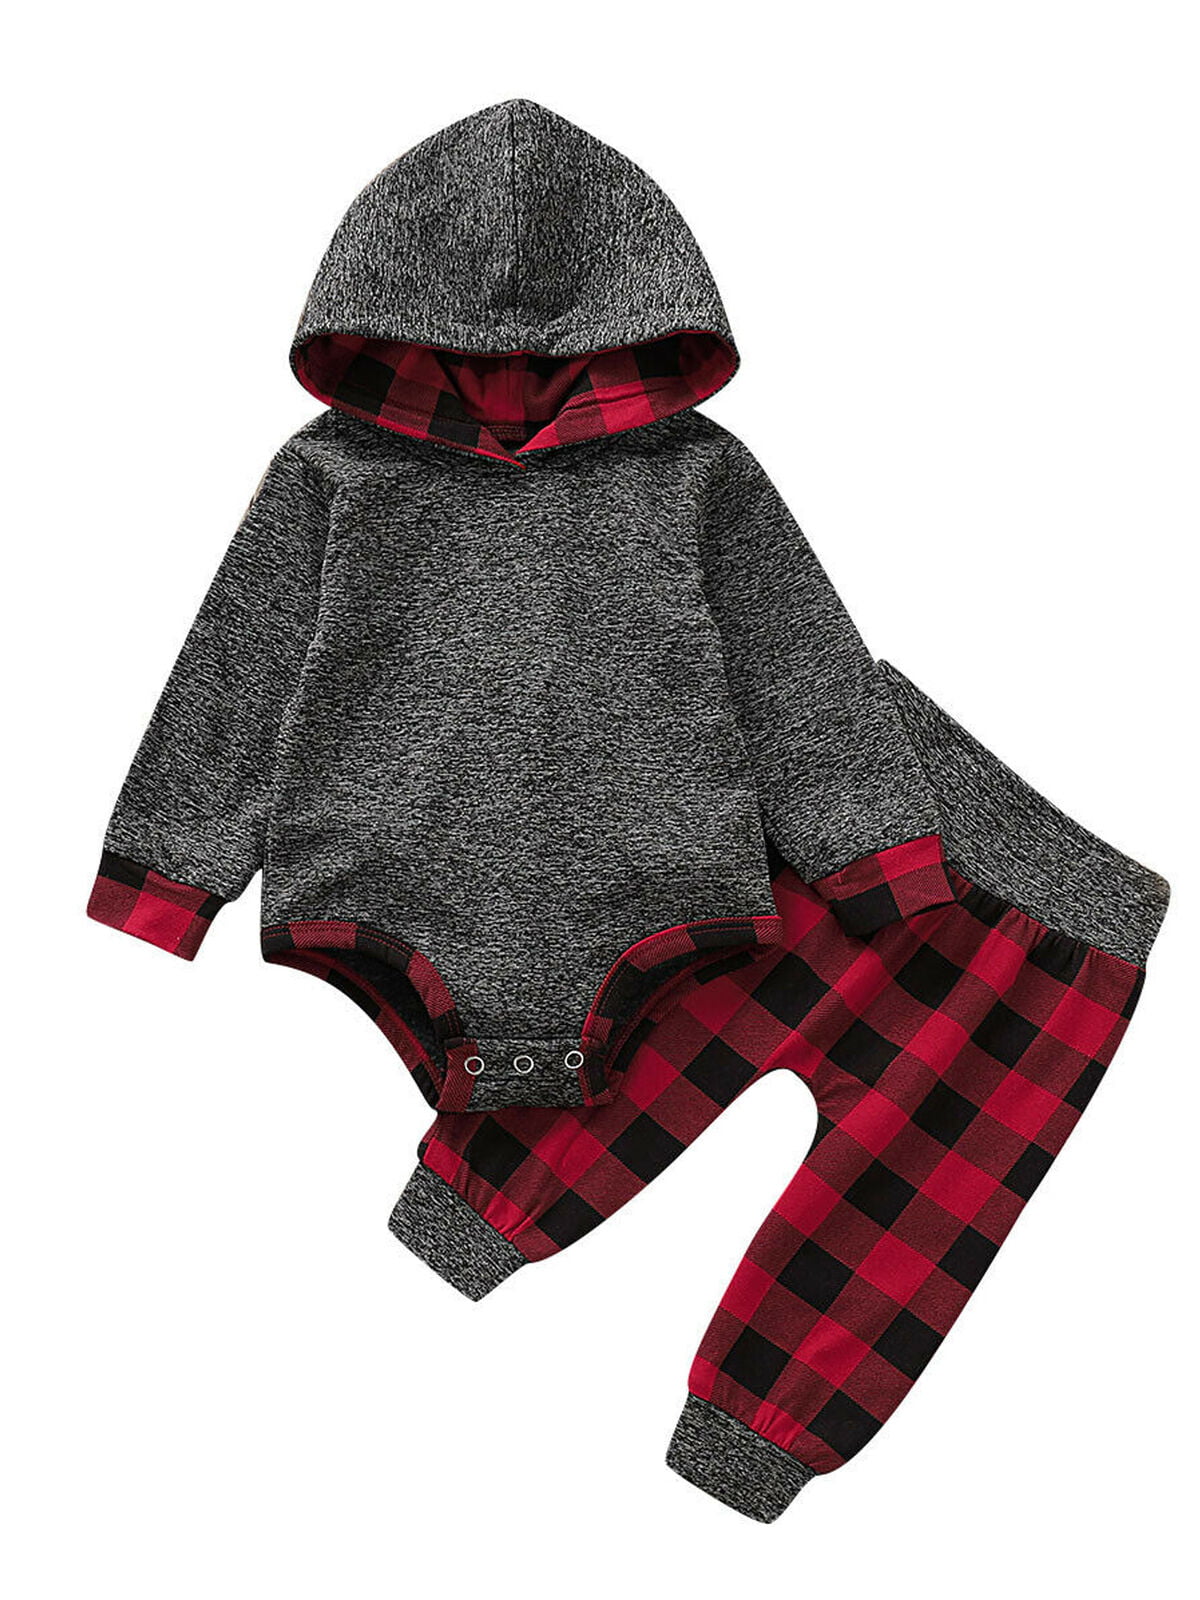 Details about  / Winter Children Clothing 3PC Baby Boys Outfits Sets Kids Boy Hooded Clothes Sets